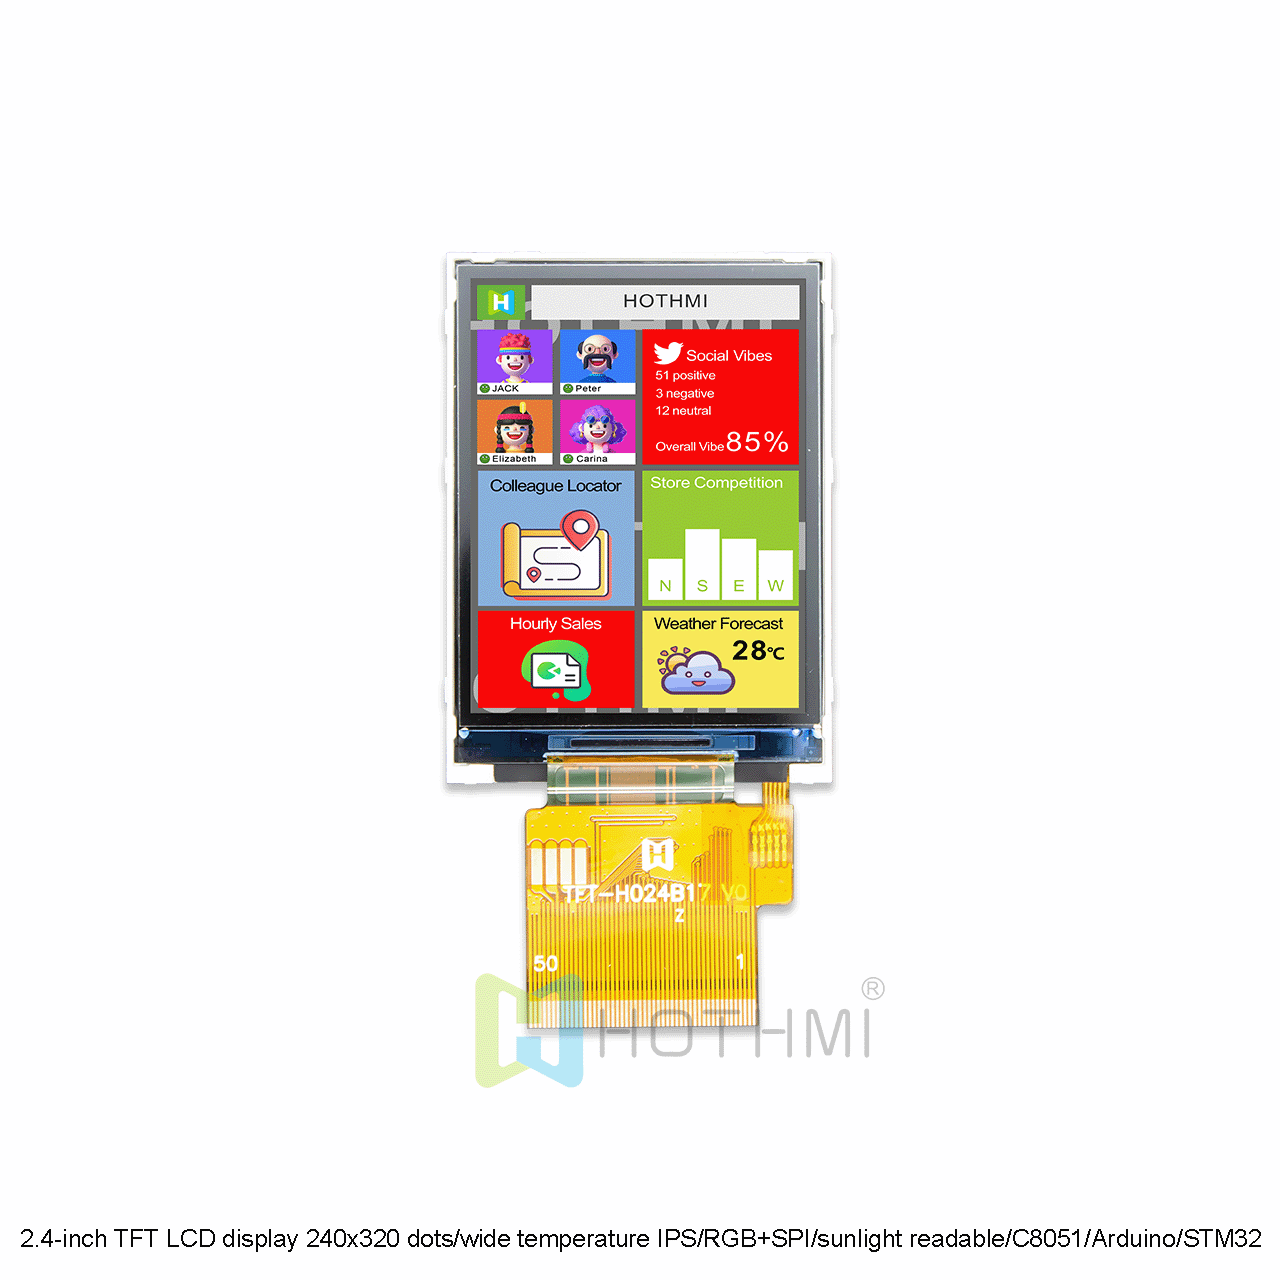 2.4-inch TFT LCD display 240x320 dots/wide temperature IPS full angle/RGB+SPI/sunlight readable/compatible with C8051/Arduino/STM32